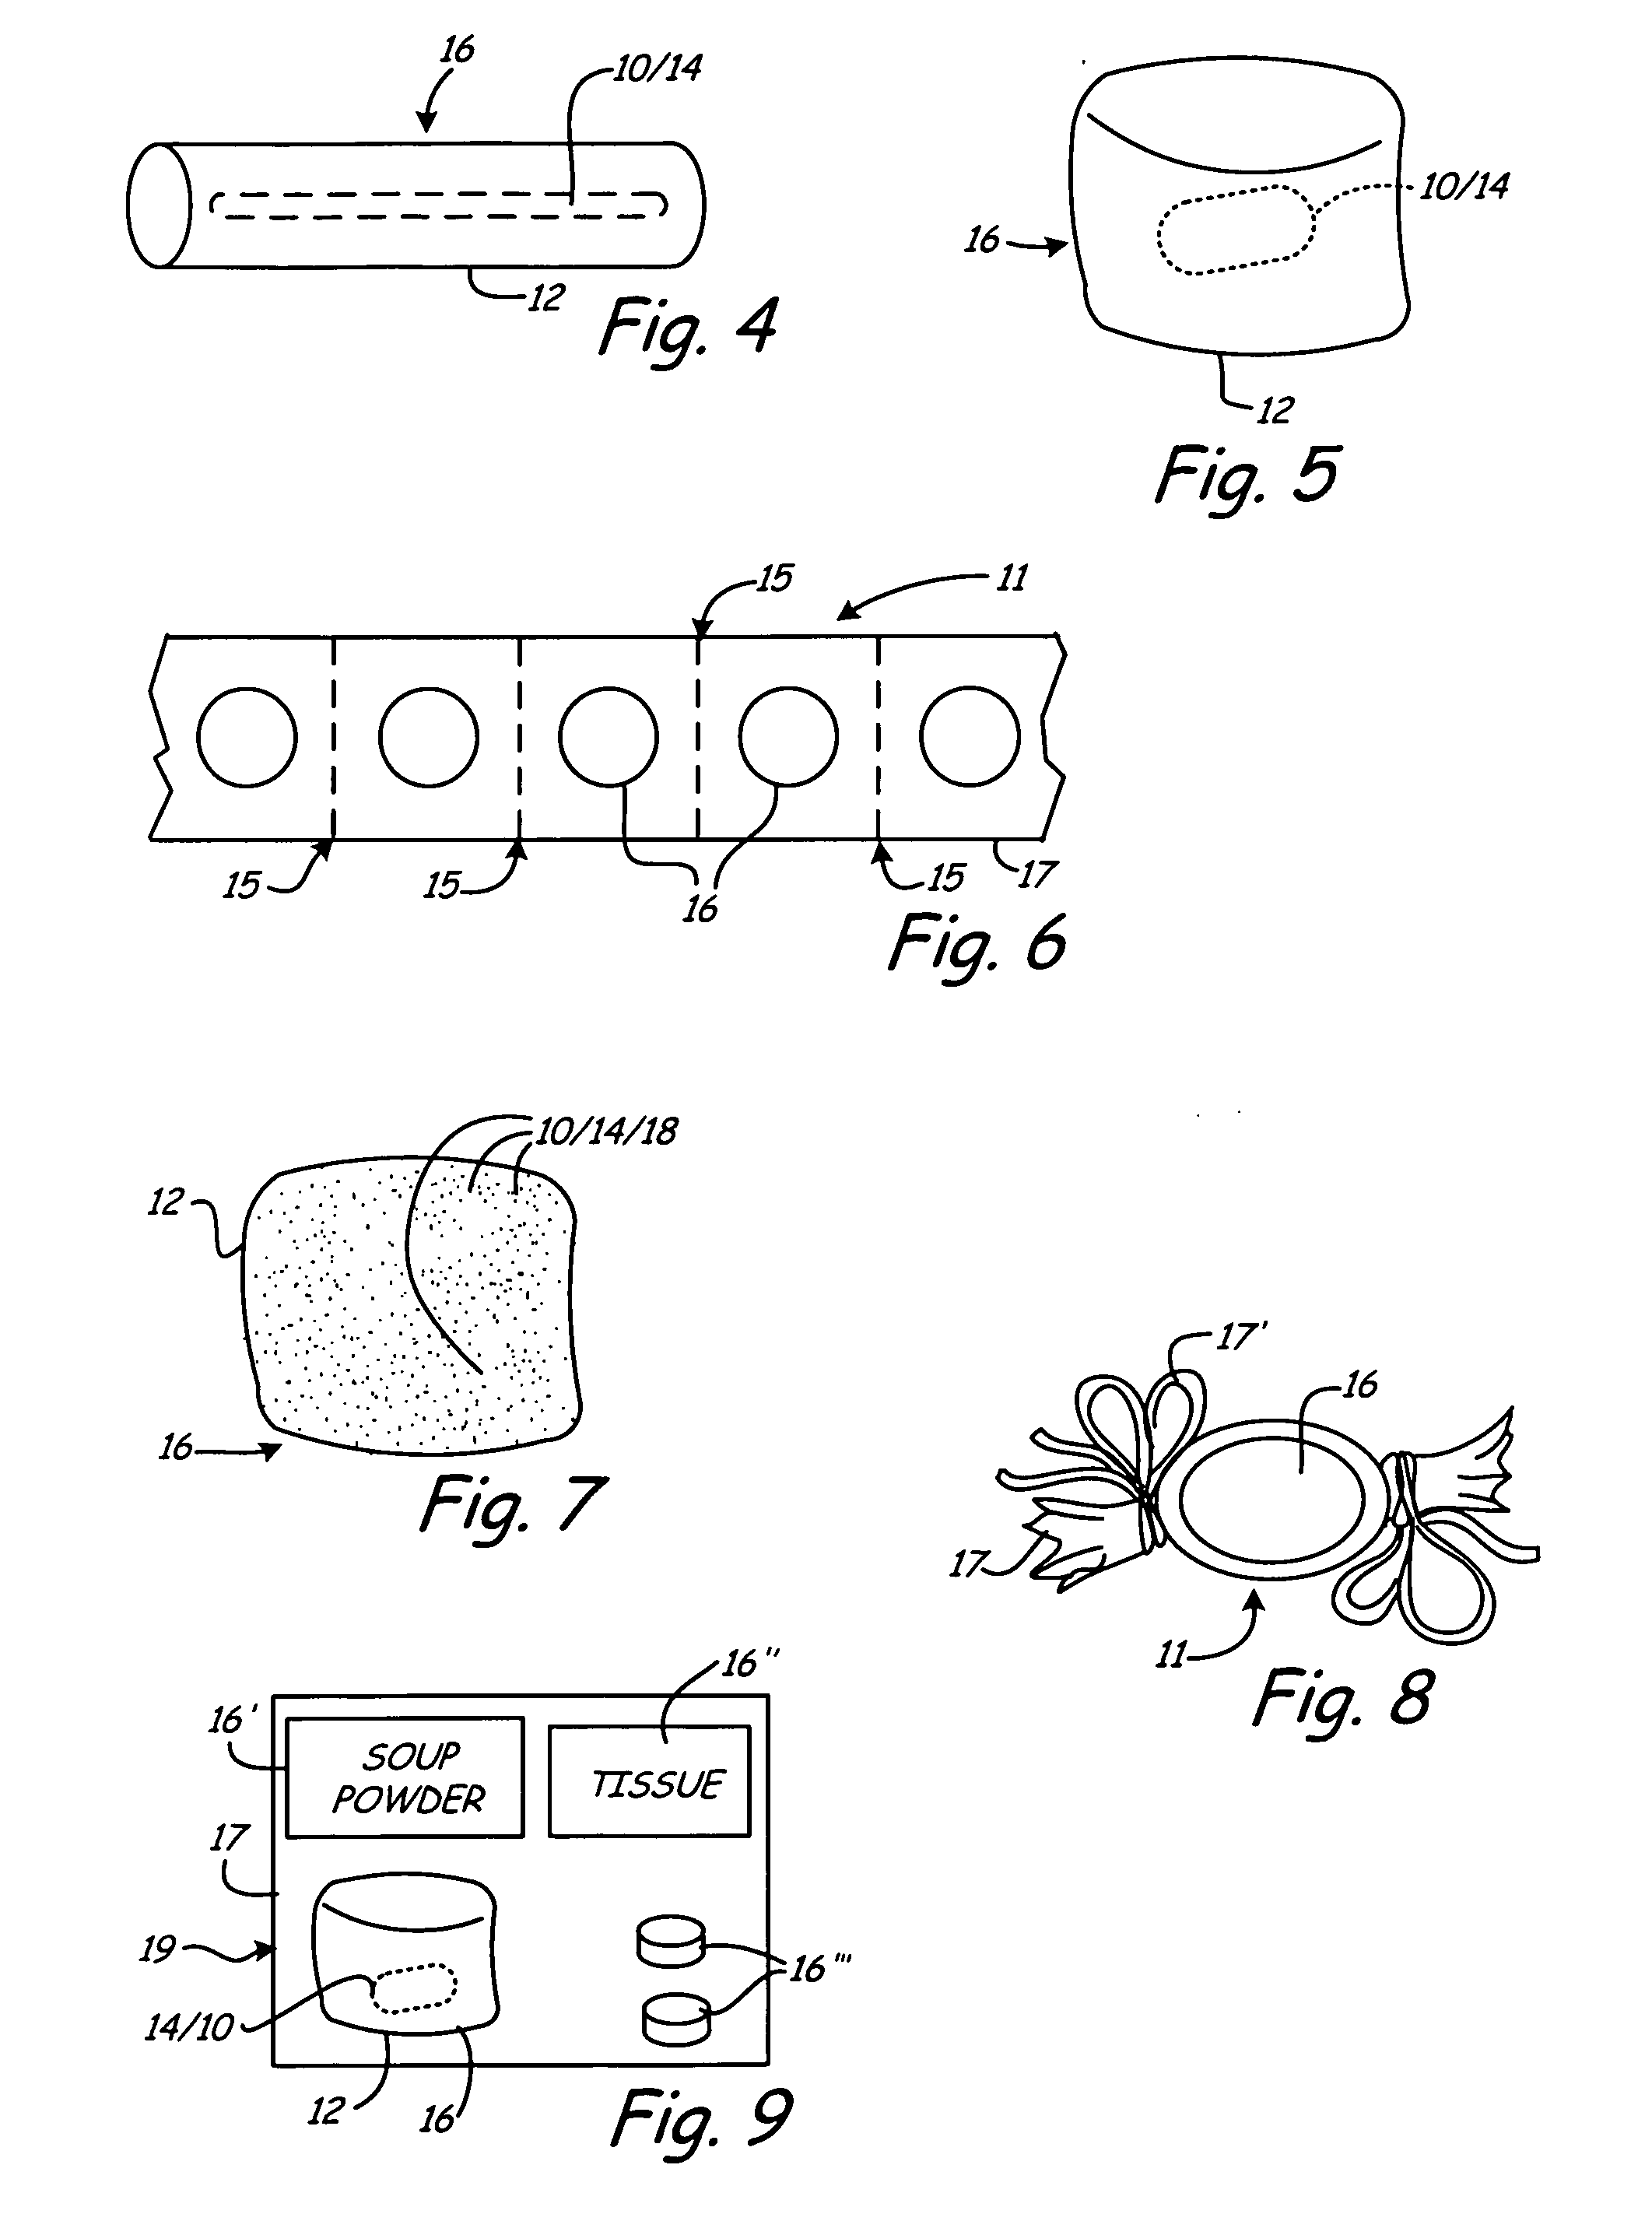 Apparatus and methods of improved delivery of orally-administered therapeutic substances